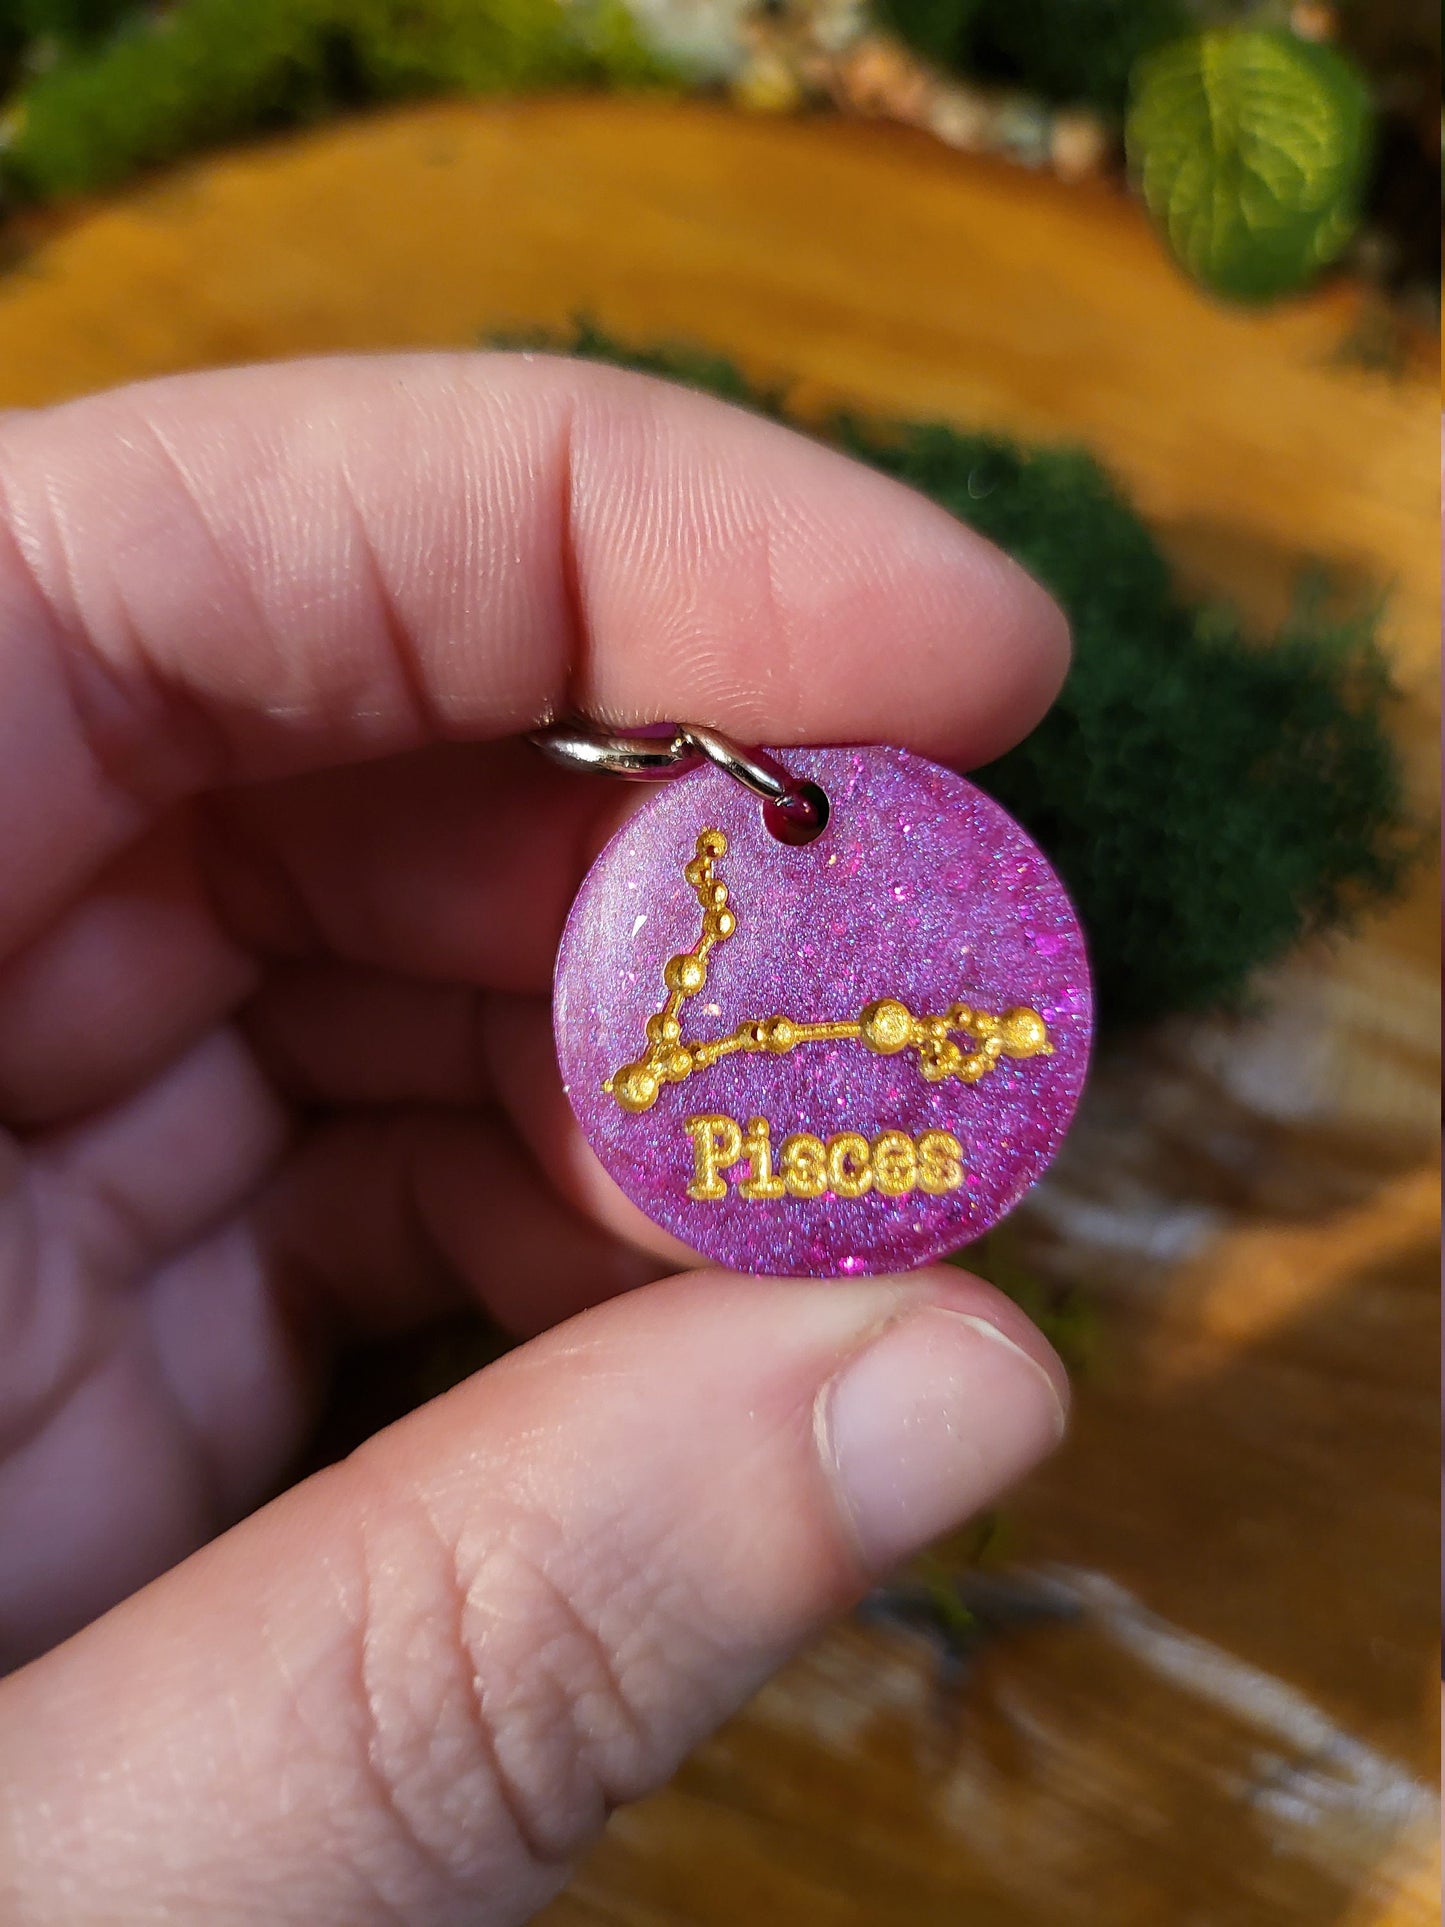 Hot Pink and Gold Astrological Keychains with Charms